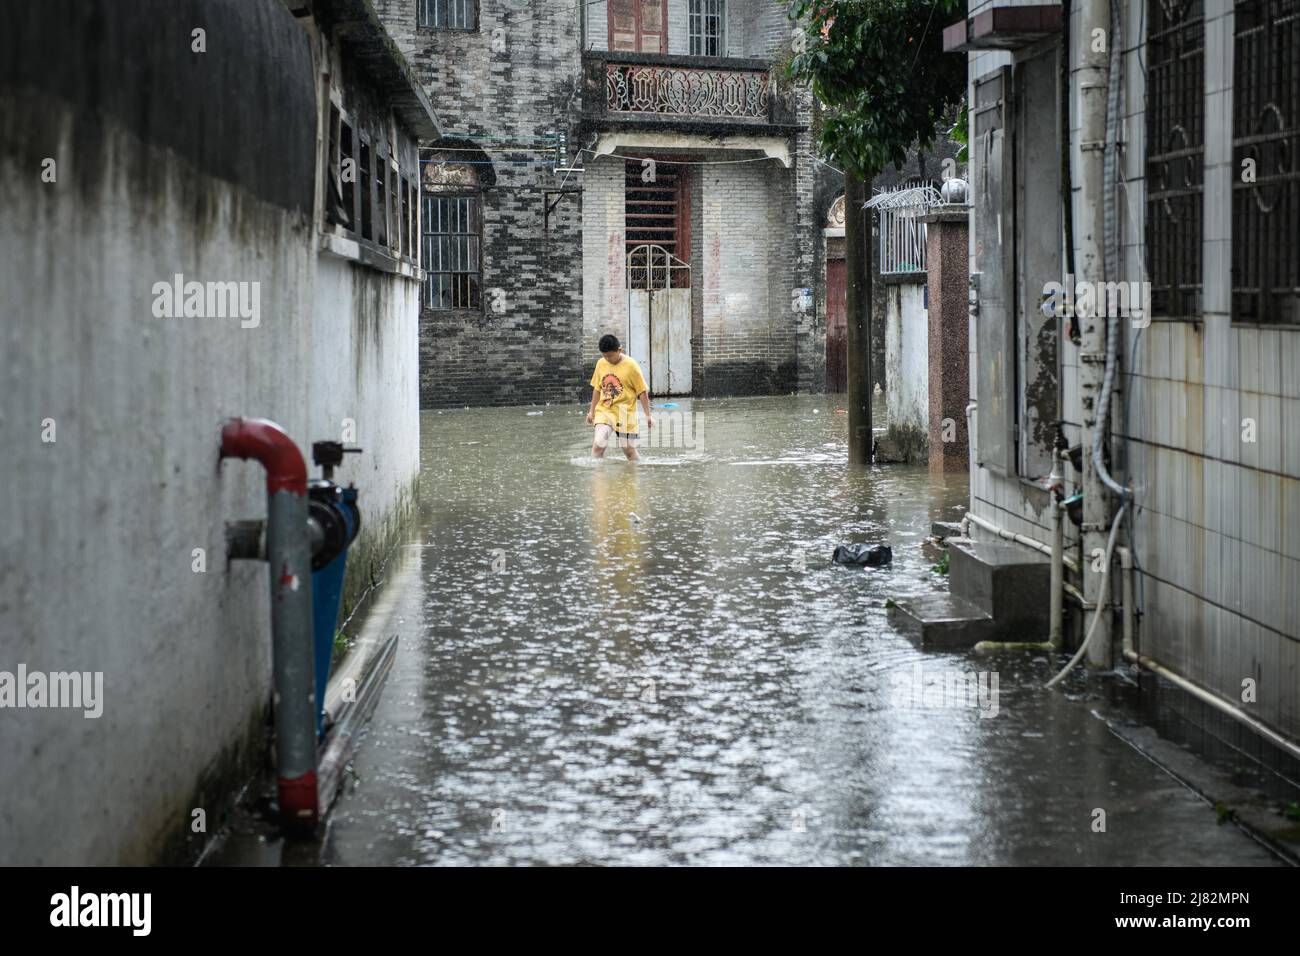 ZHONGSHAN, CHINA - MAY 12, 2022 - Citizens walk in a flooded street after a rainstorm in Zhongshan, Guangdong Province, China, May 12, 2022. Stock Photo